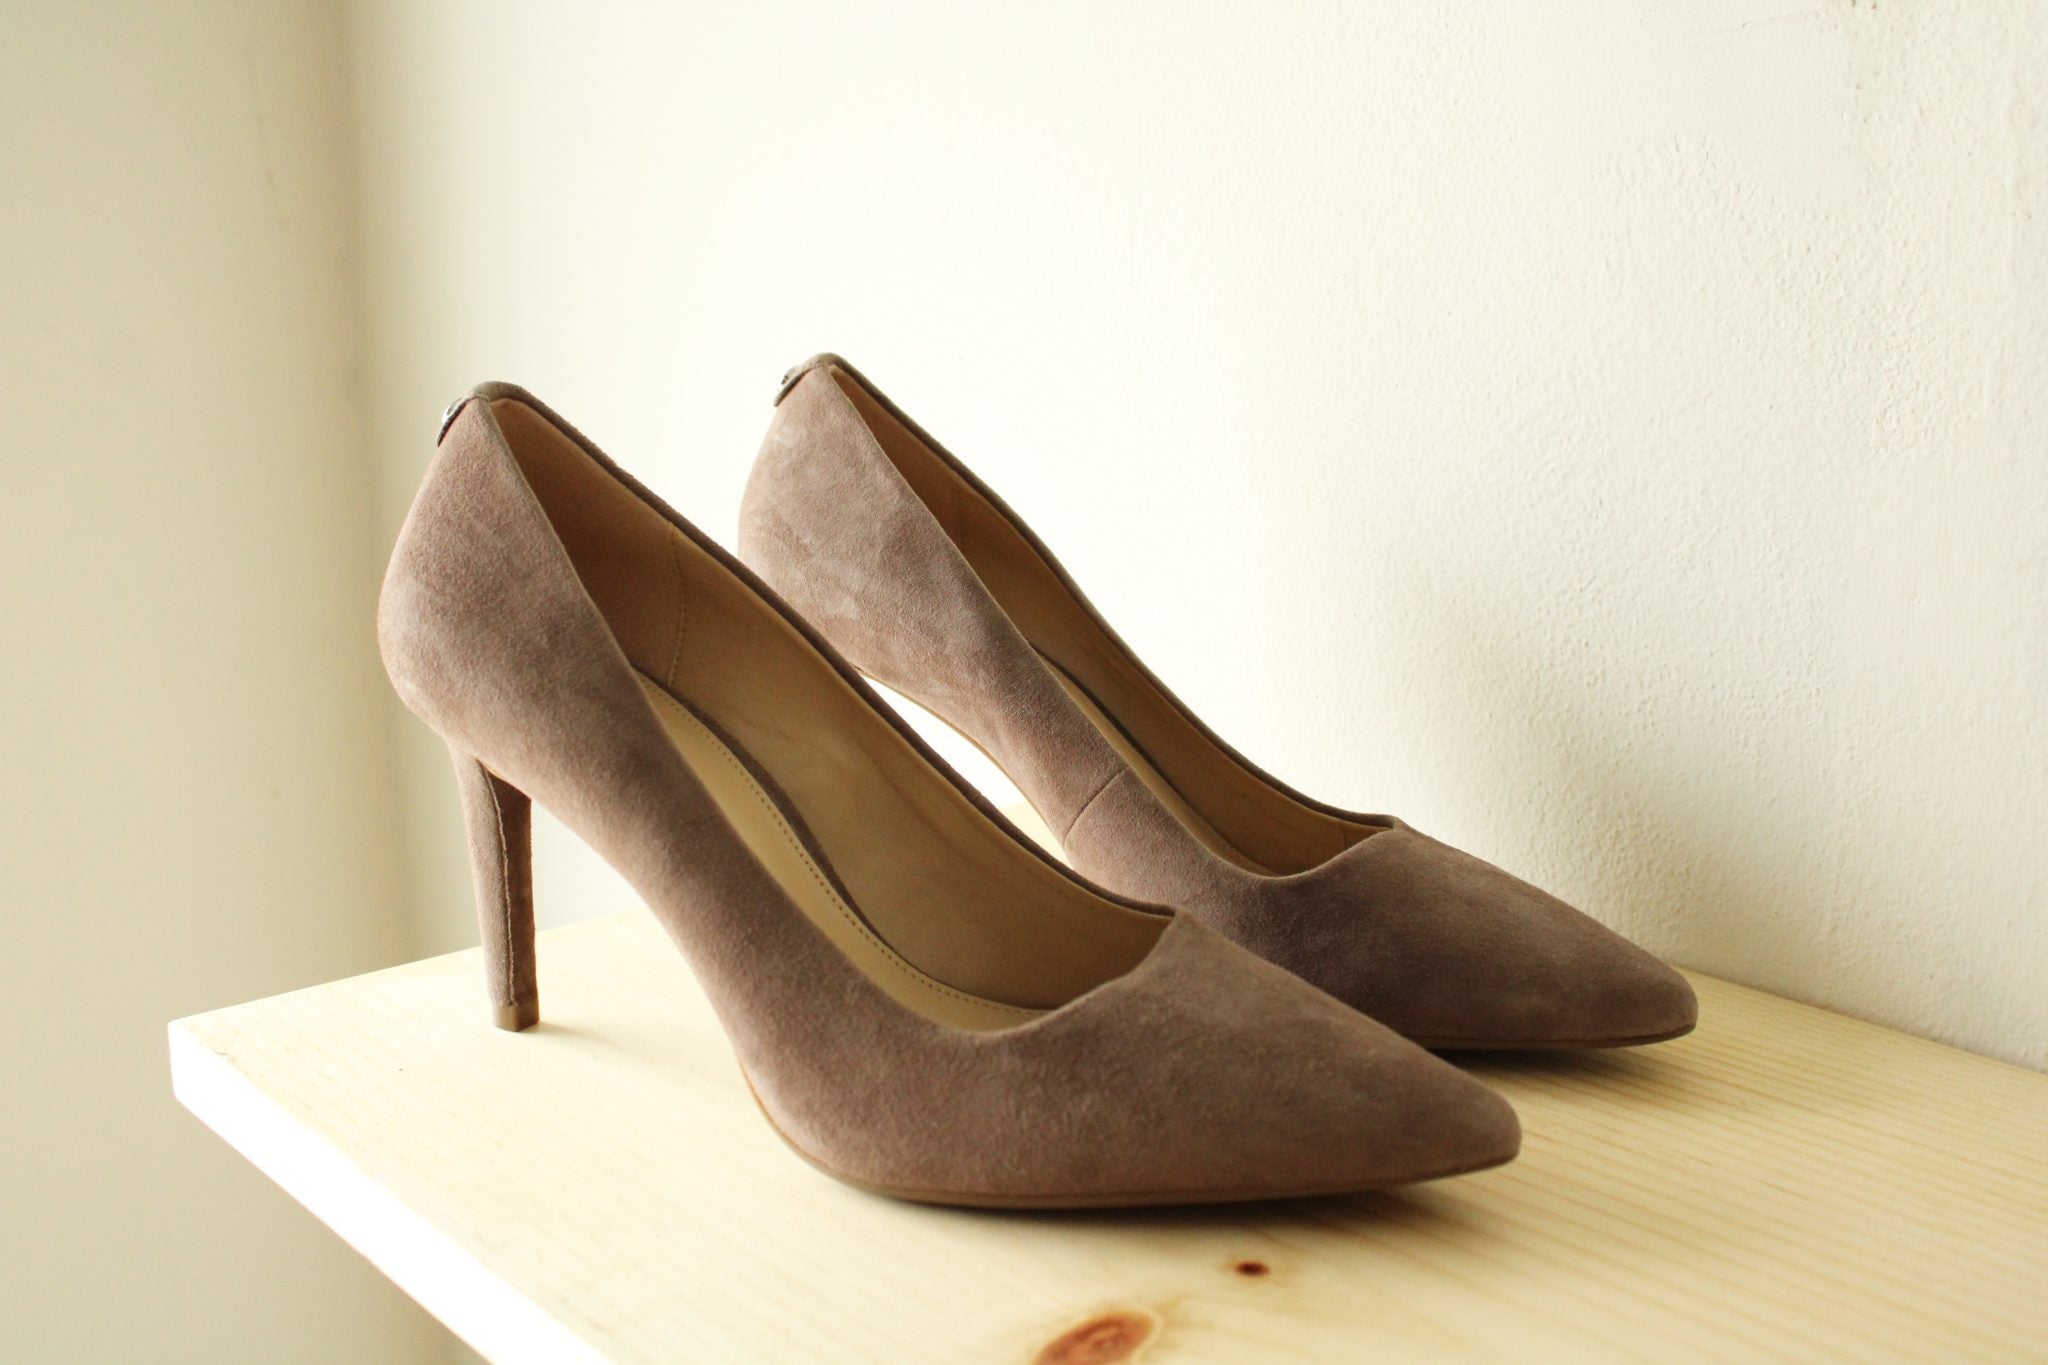 Michael Kors Taupe Suede Pointed Toe Heels | Size 8